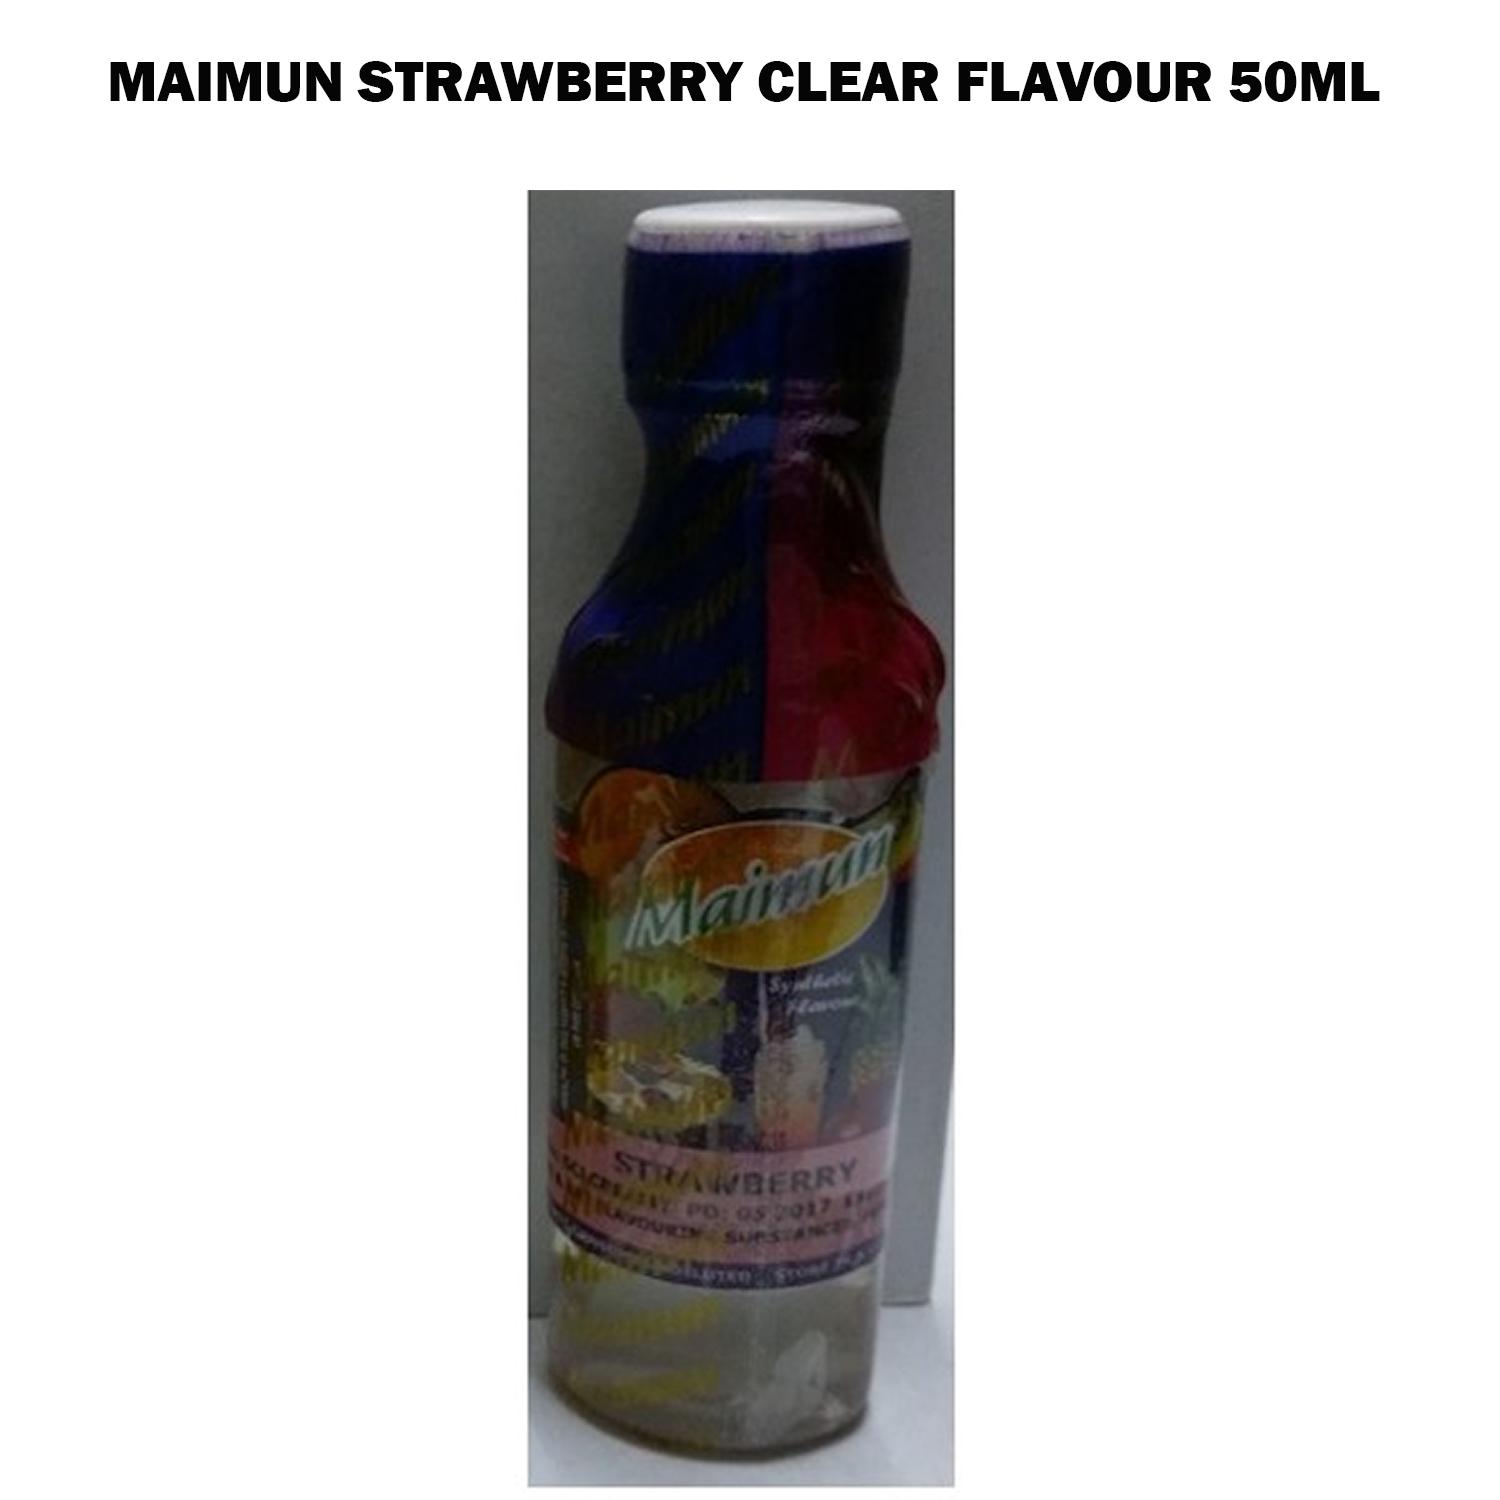 MAIMUN STRAWBERRY CLEAR FLAVOUR 50ML